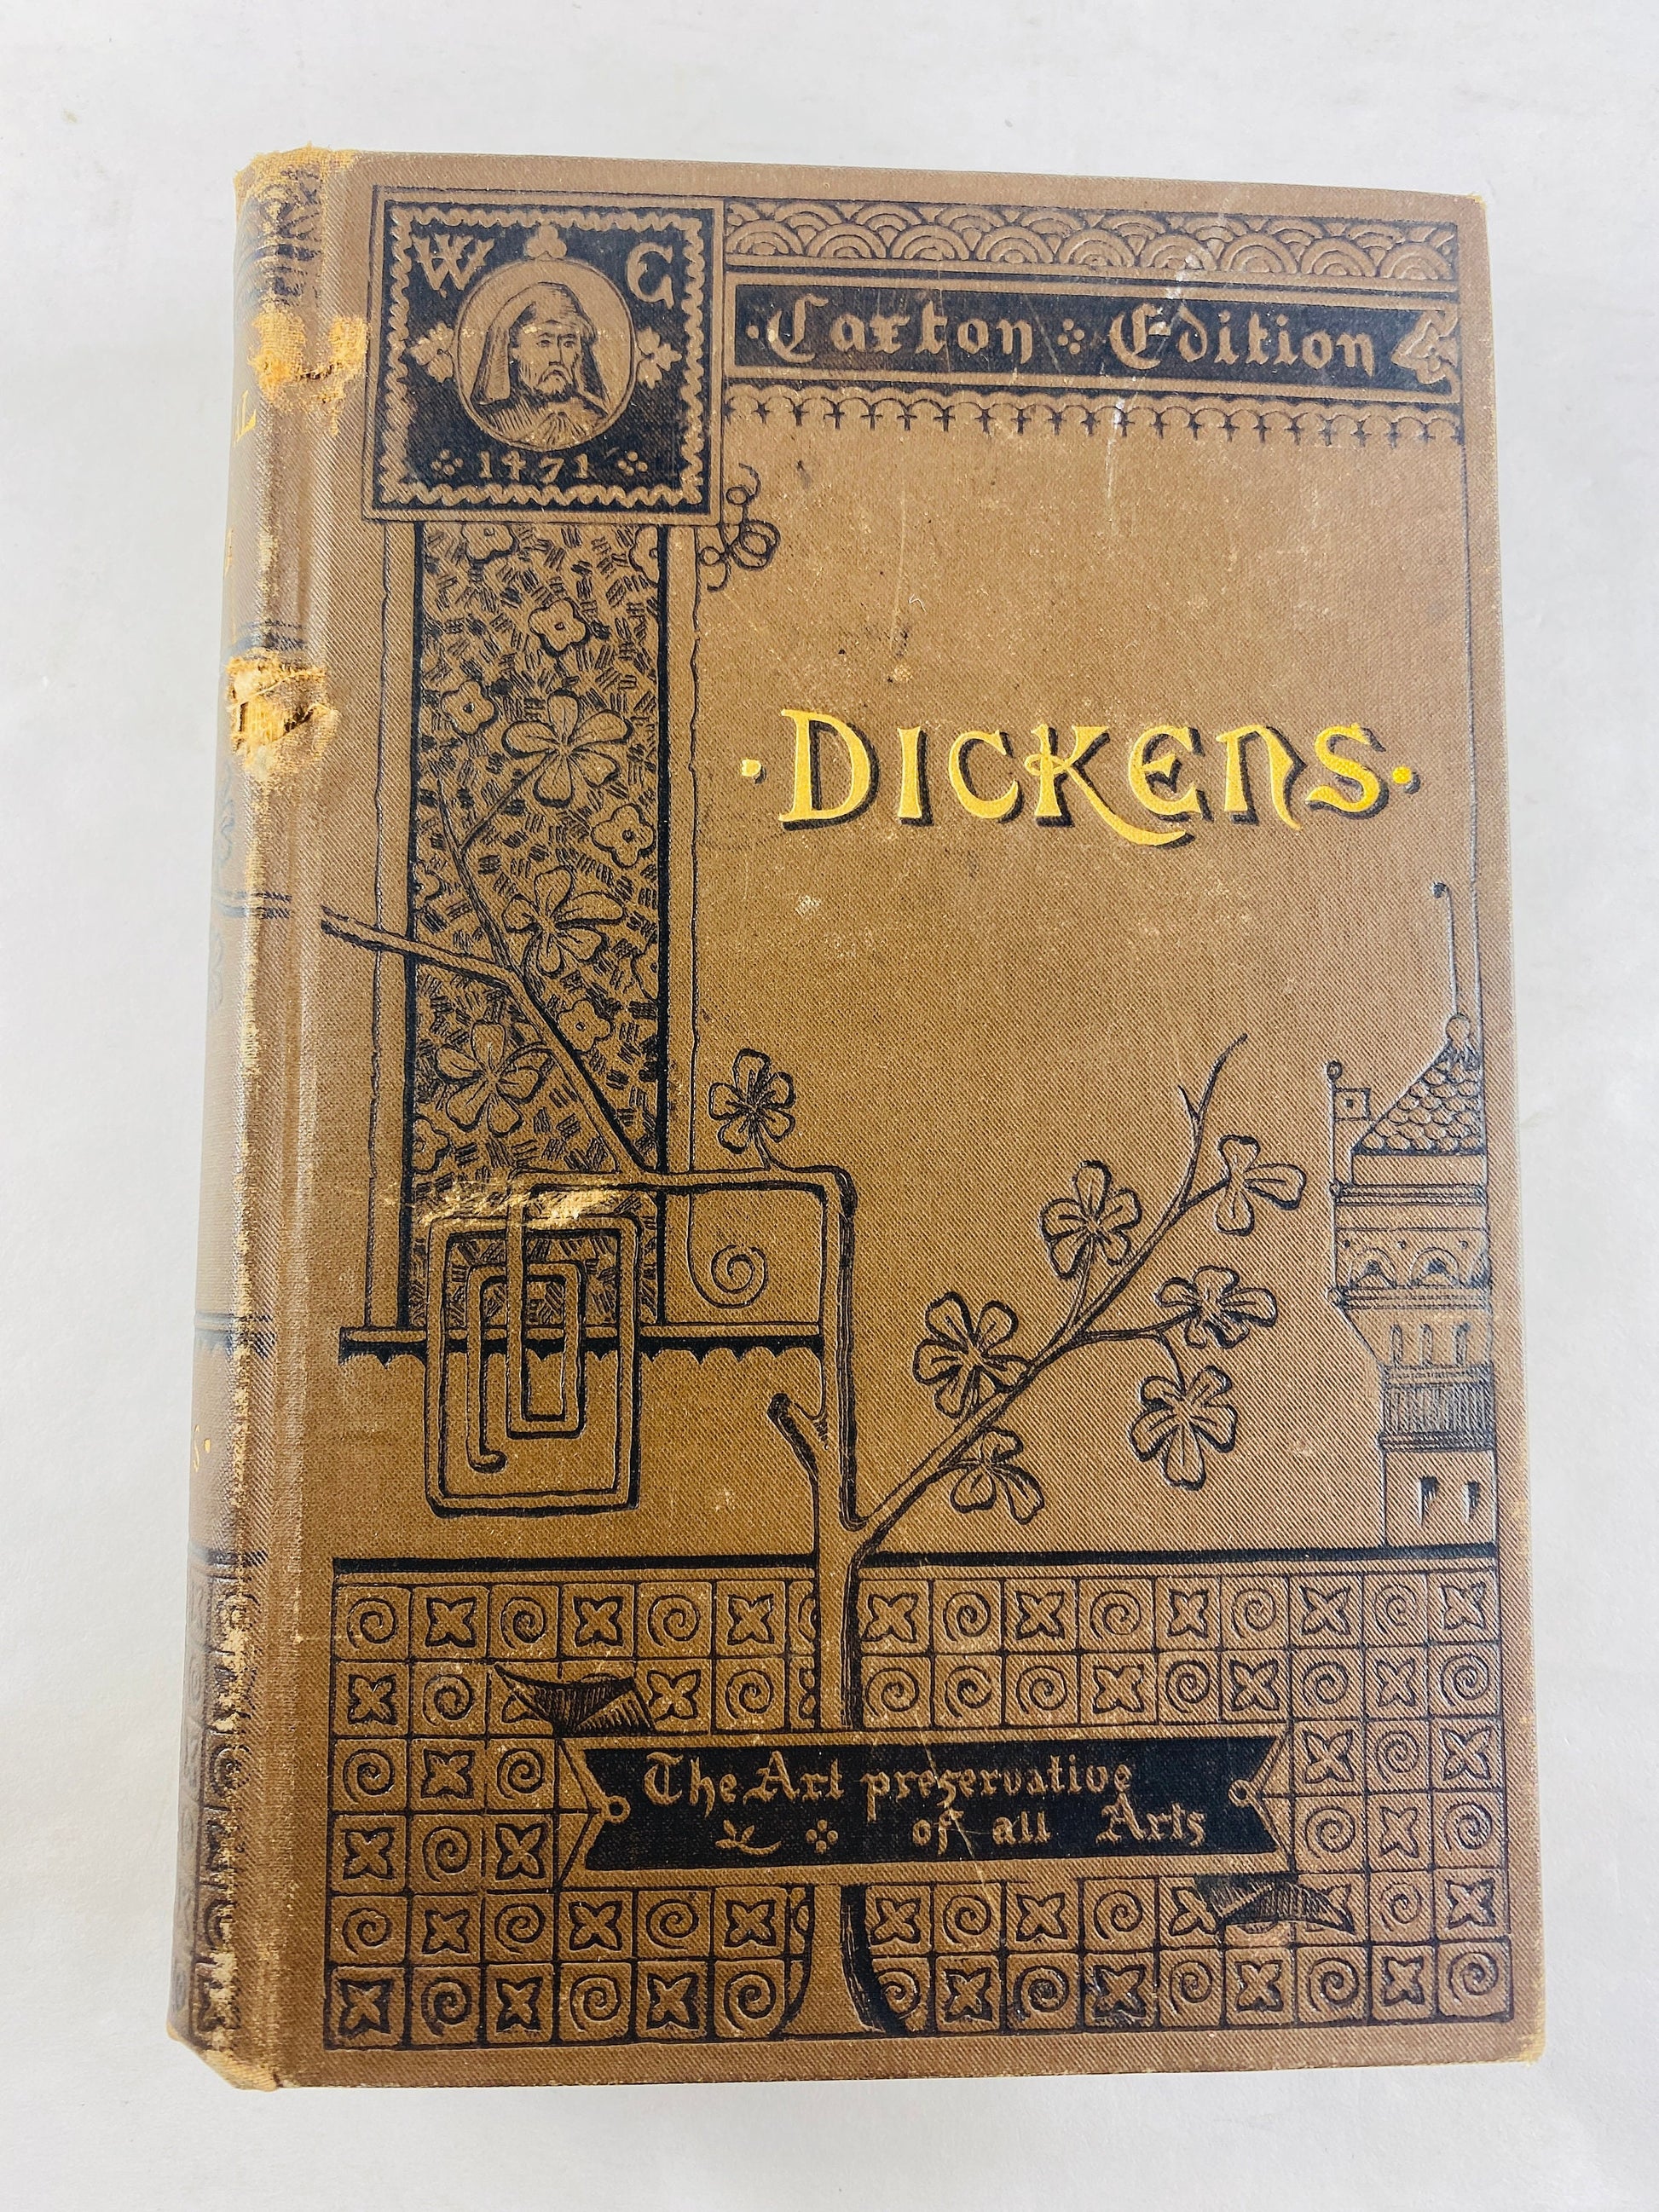 Our Mutual Friend vintage book by Charles Dickens circa 1883 Beautiful brown embossed gold cover. Antique book about Victorian working class